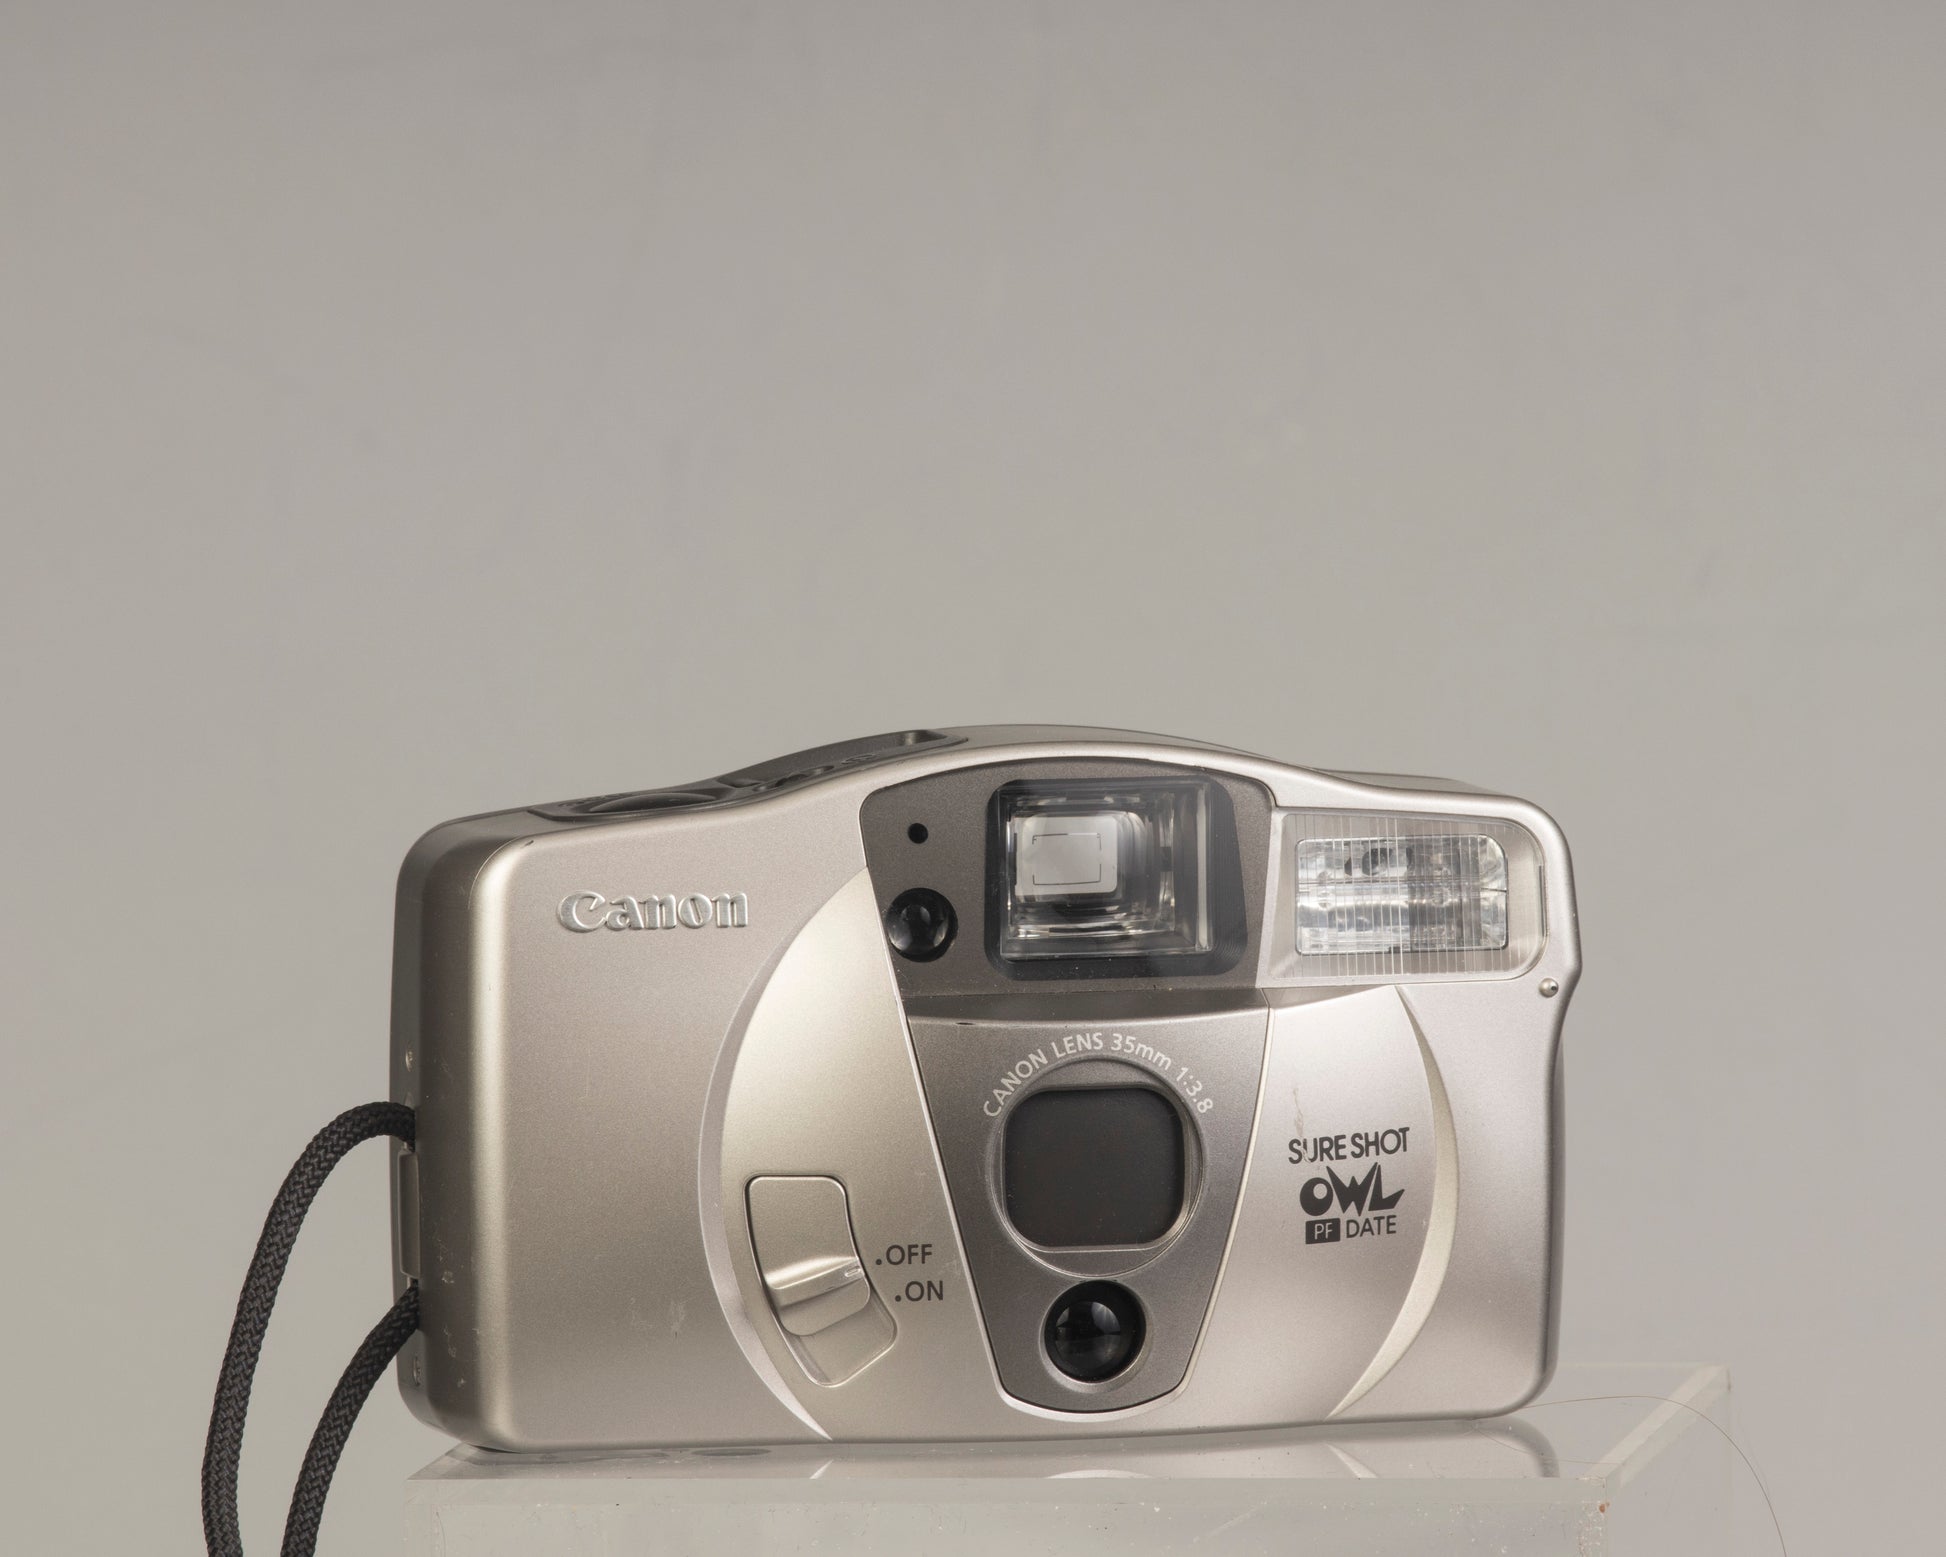 Canon Sure Shot Owl PF Date: a point-and-shoot 35mm film camera with a 35mm f/3.8 lens